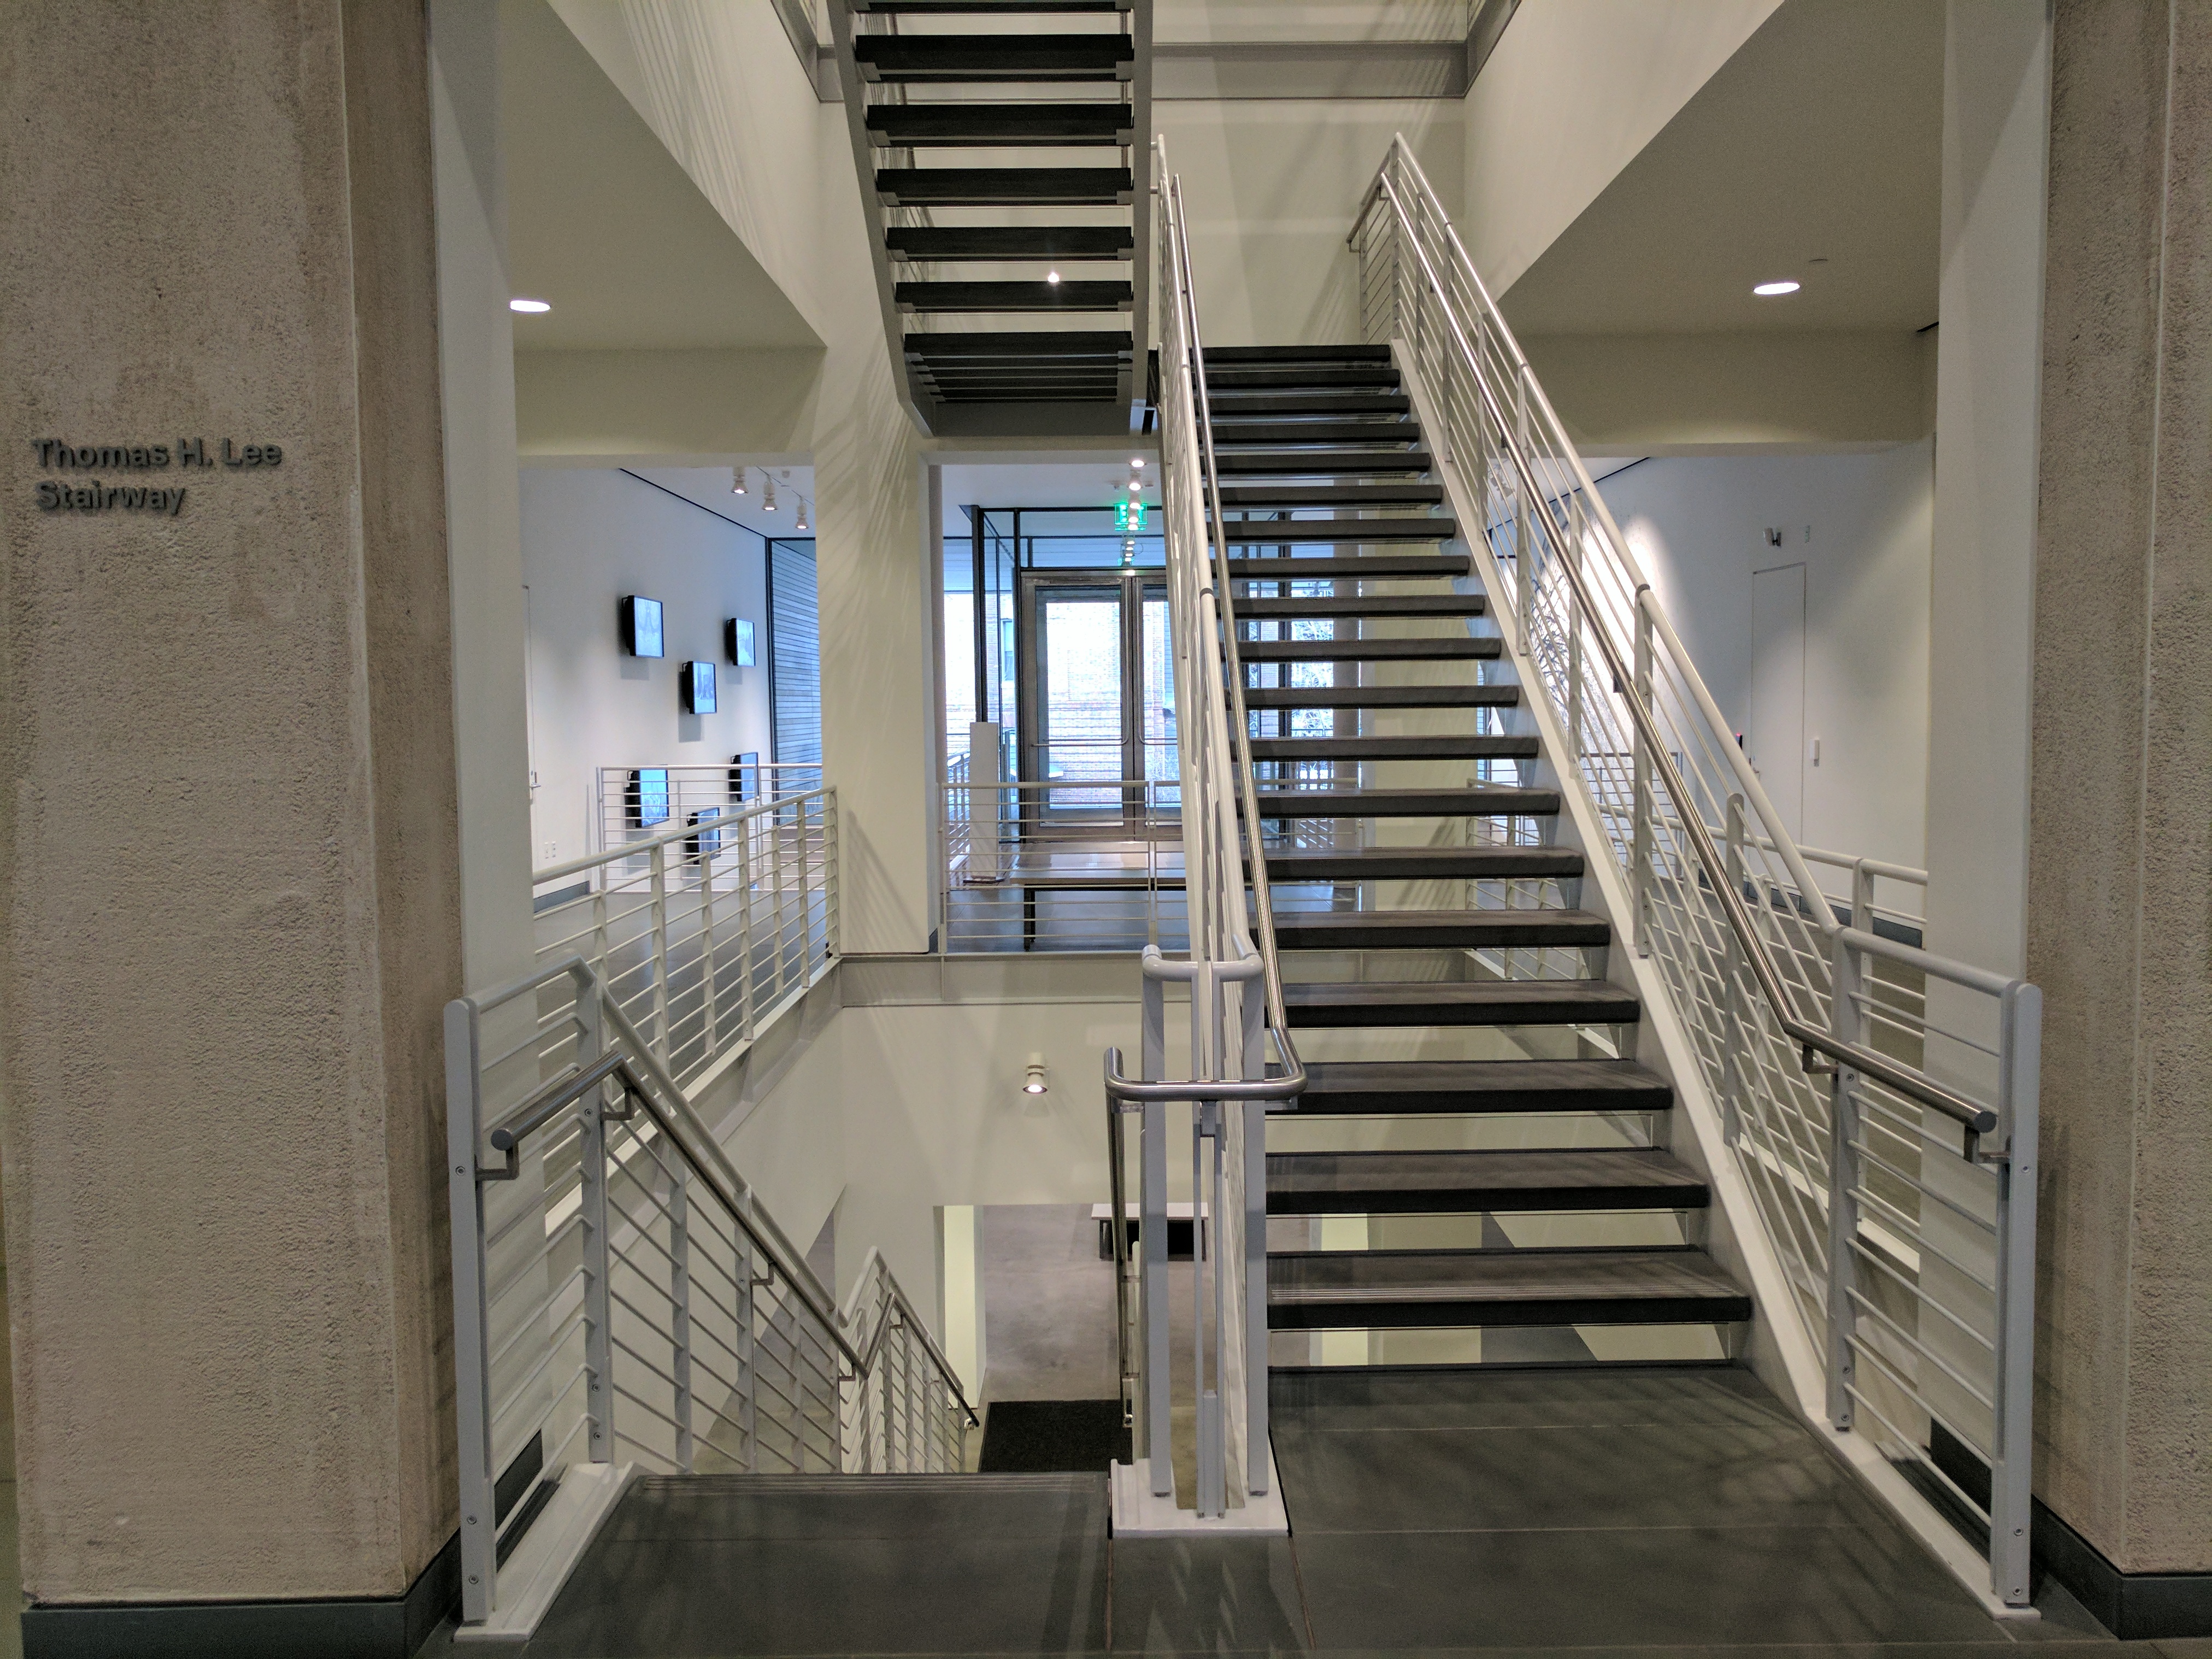 An image of the first floor stairwell of the HAM.